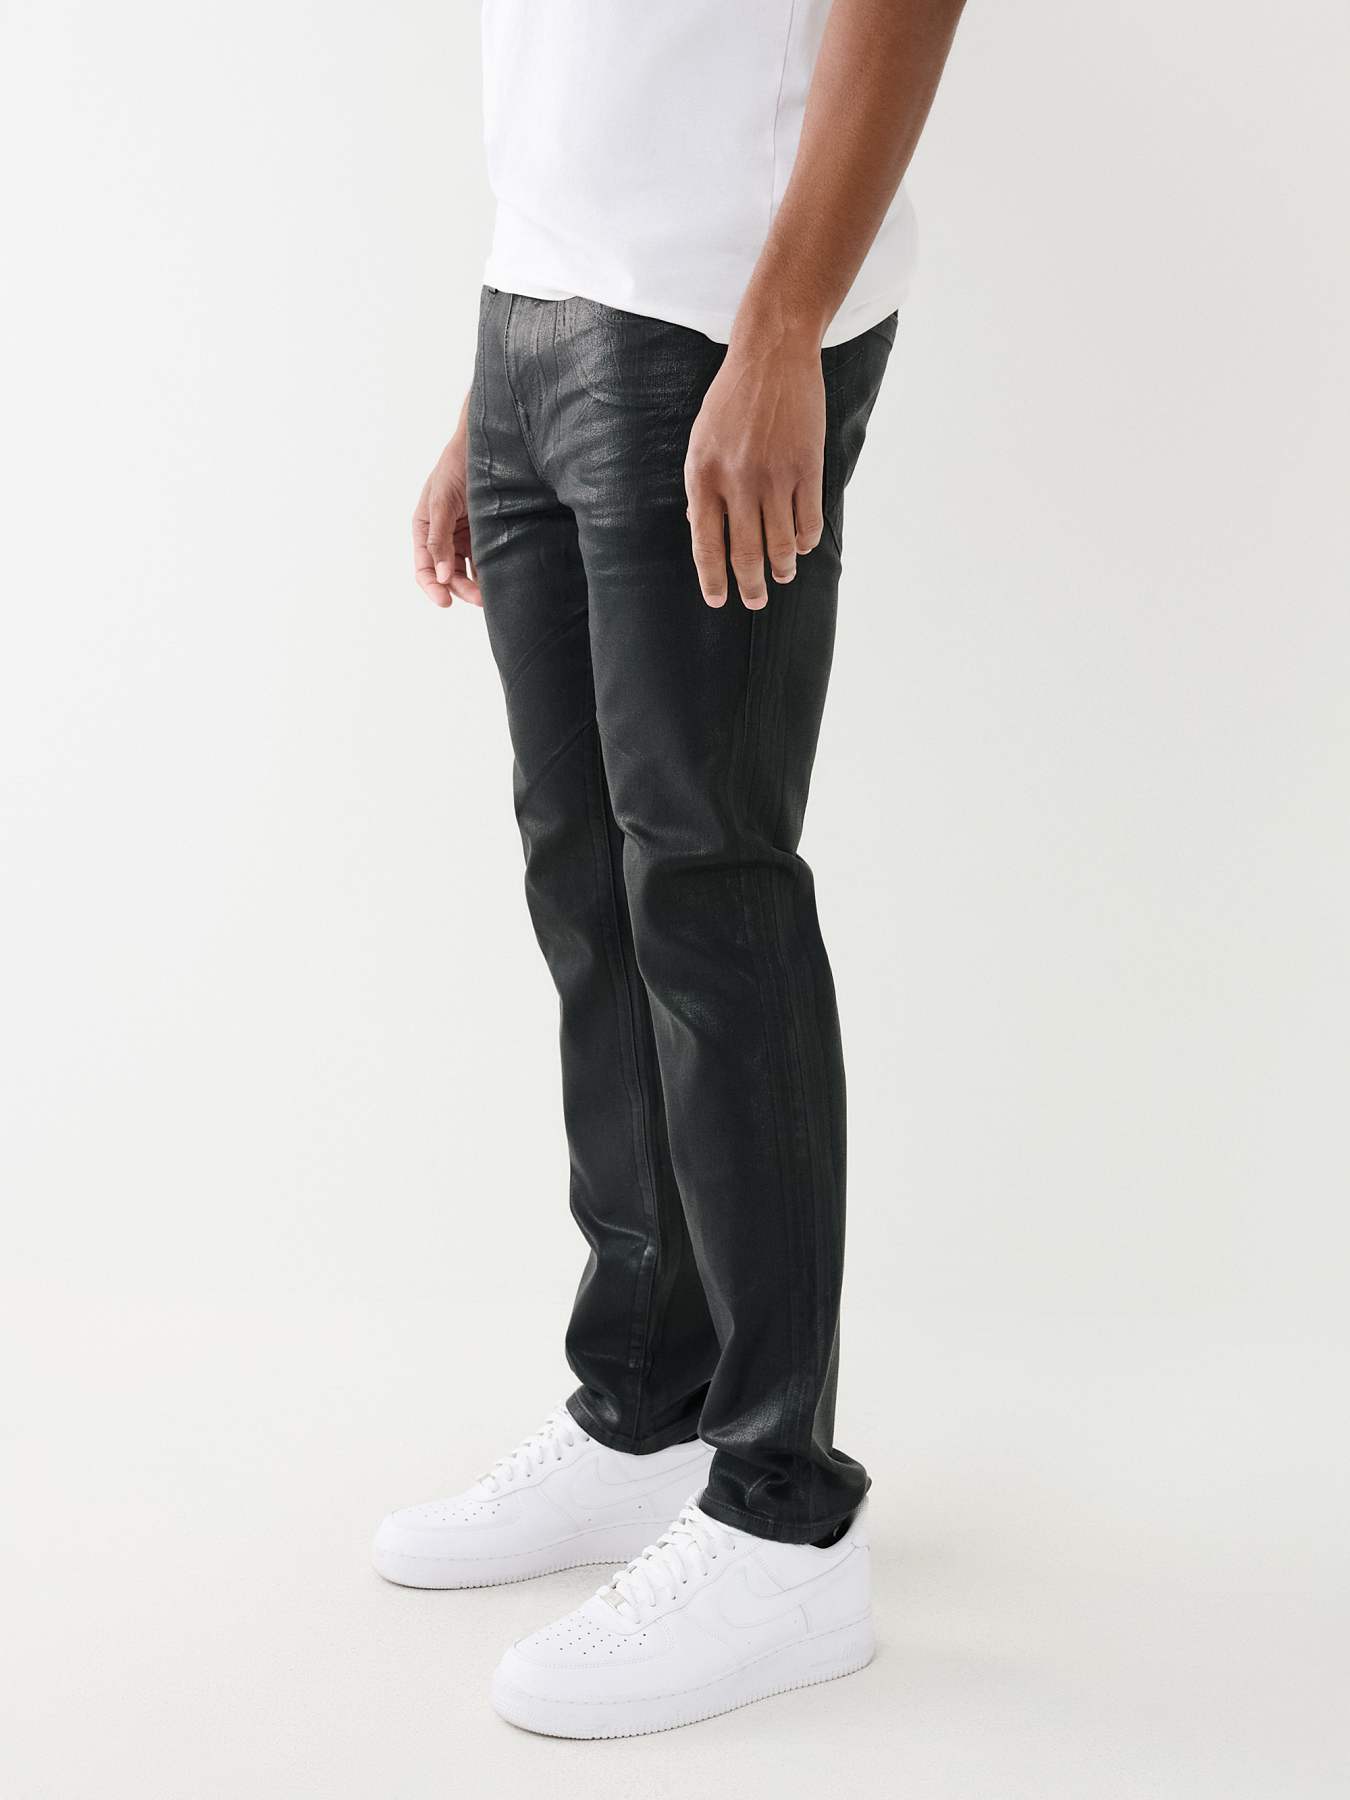 ROCCO SINGLE NEEDLE COATED JEAN 32IN